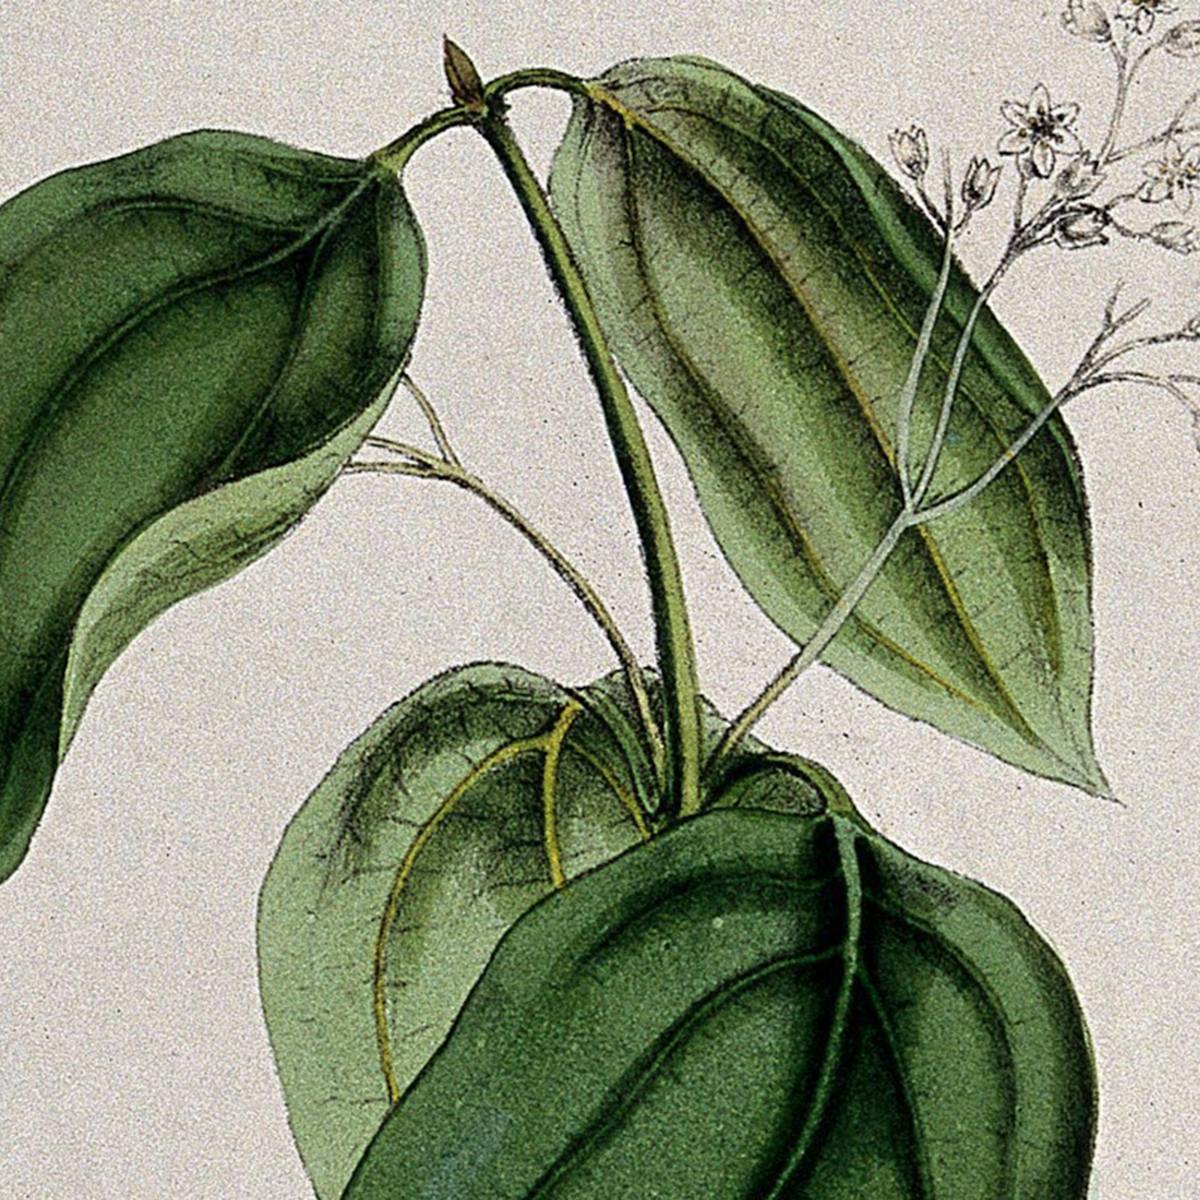 Coloured lithograph of cinnamon tree (Cinnamomum verum) flowering and leafy stem with floral sections. 